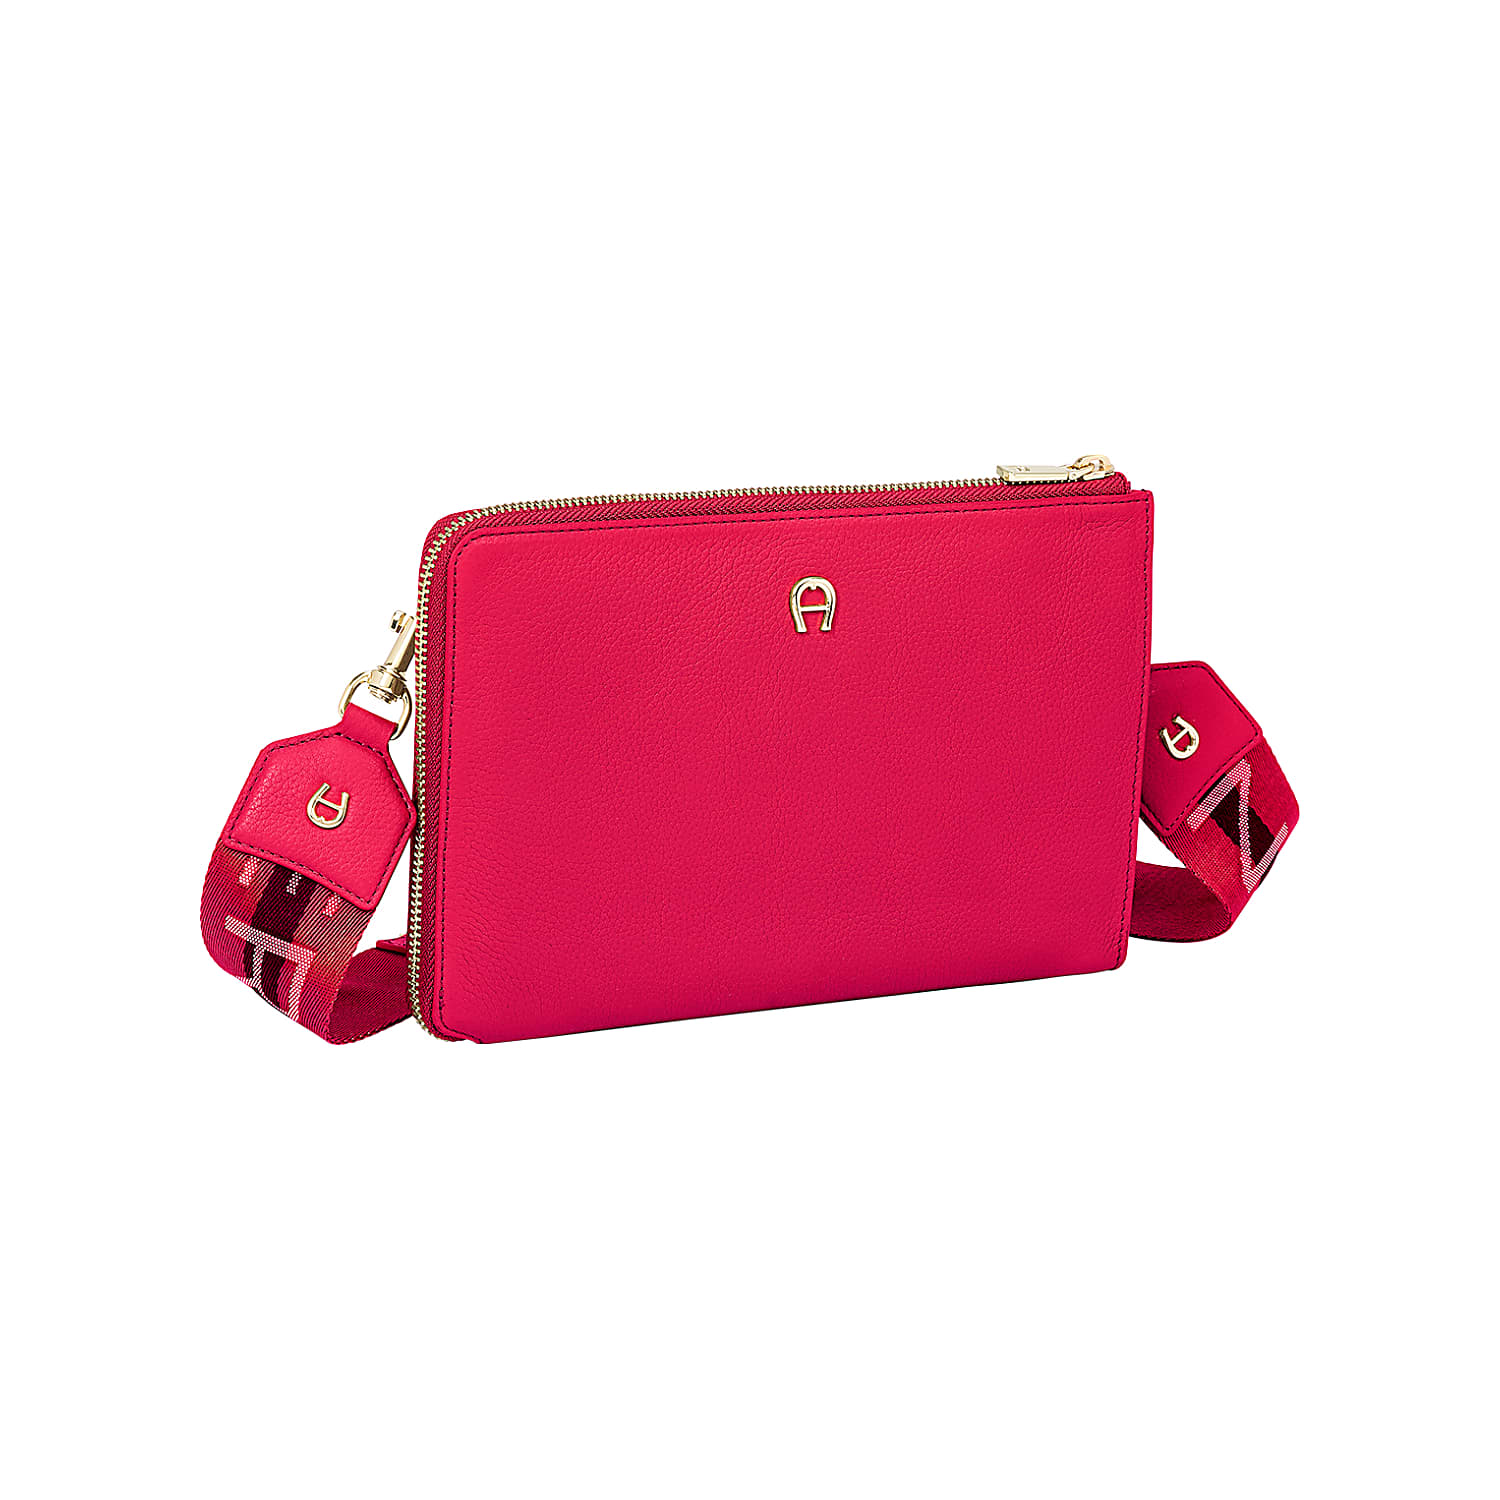 Fashion Pouch orchid pink